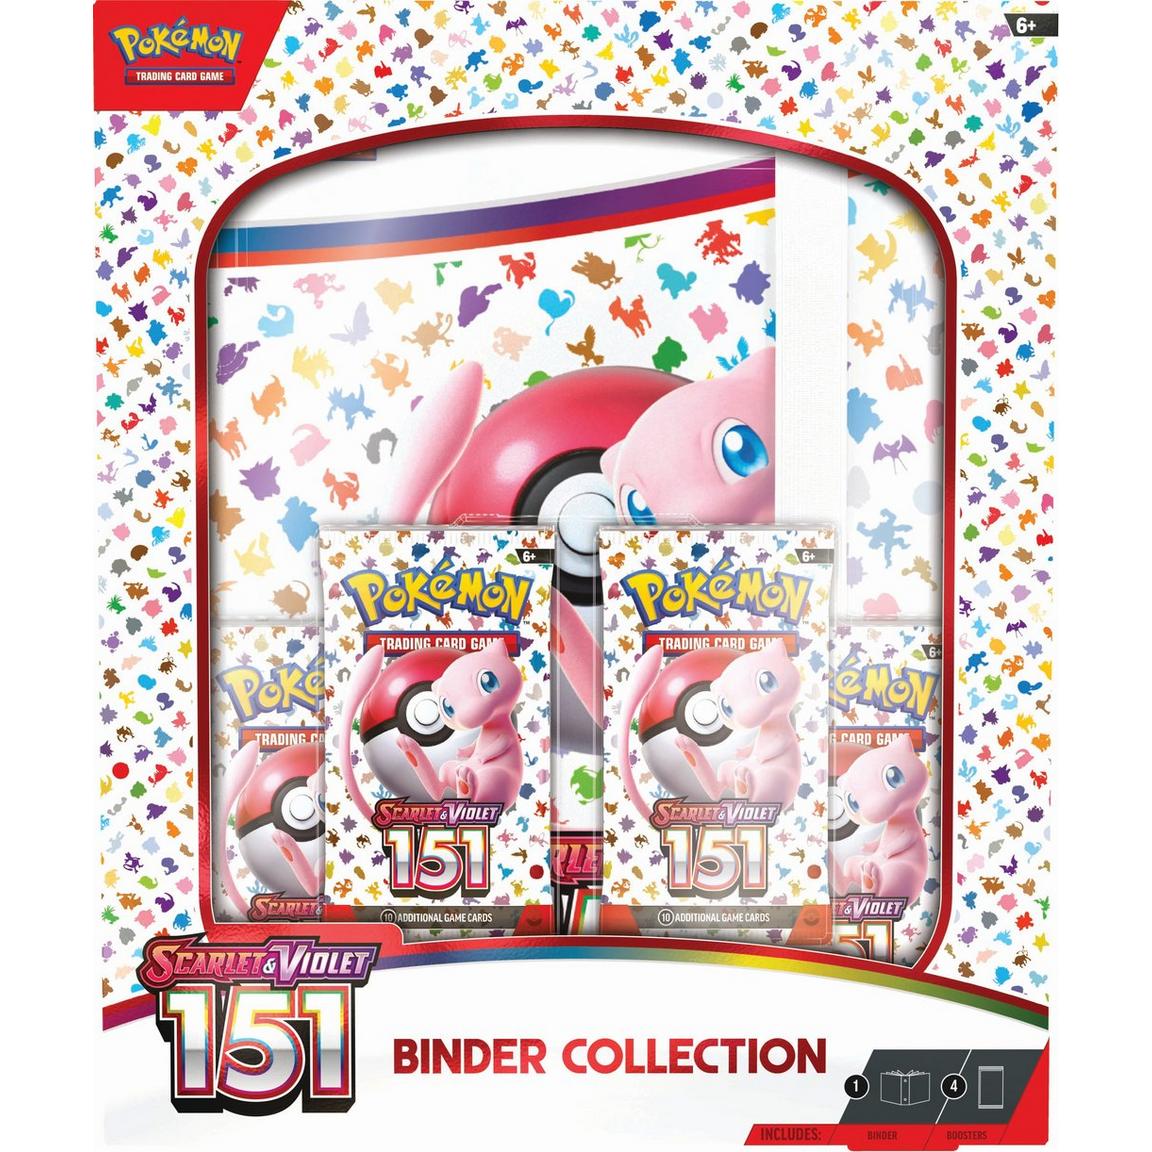  Pokemon Trading Card Game: Scarlet and Violet 151 Collection Binder Collection | Pokemon Company 